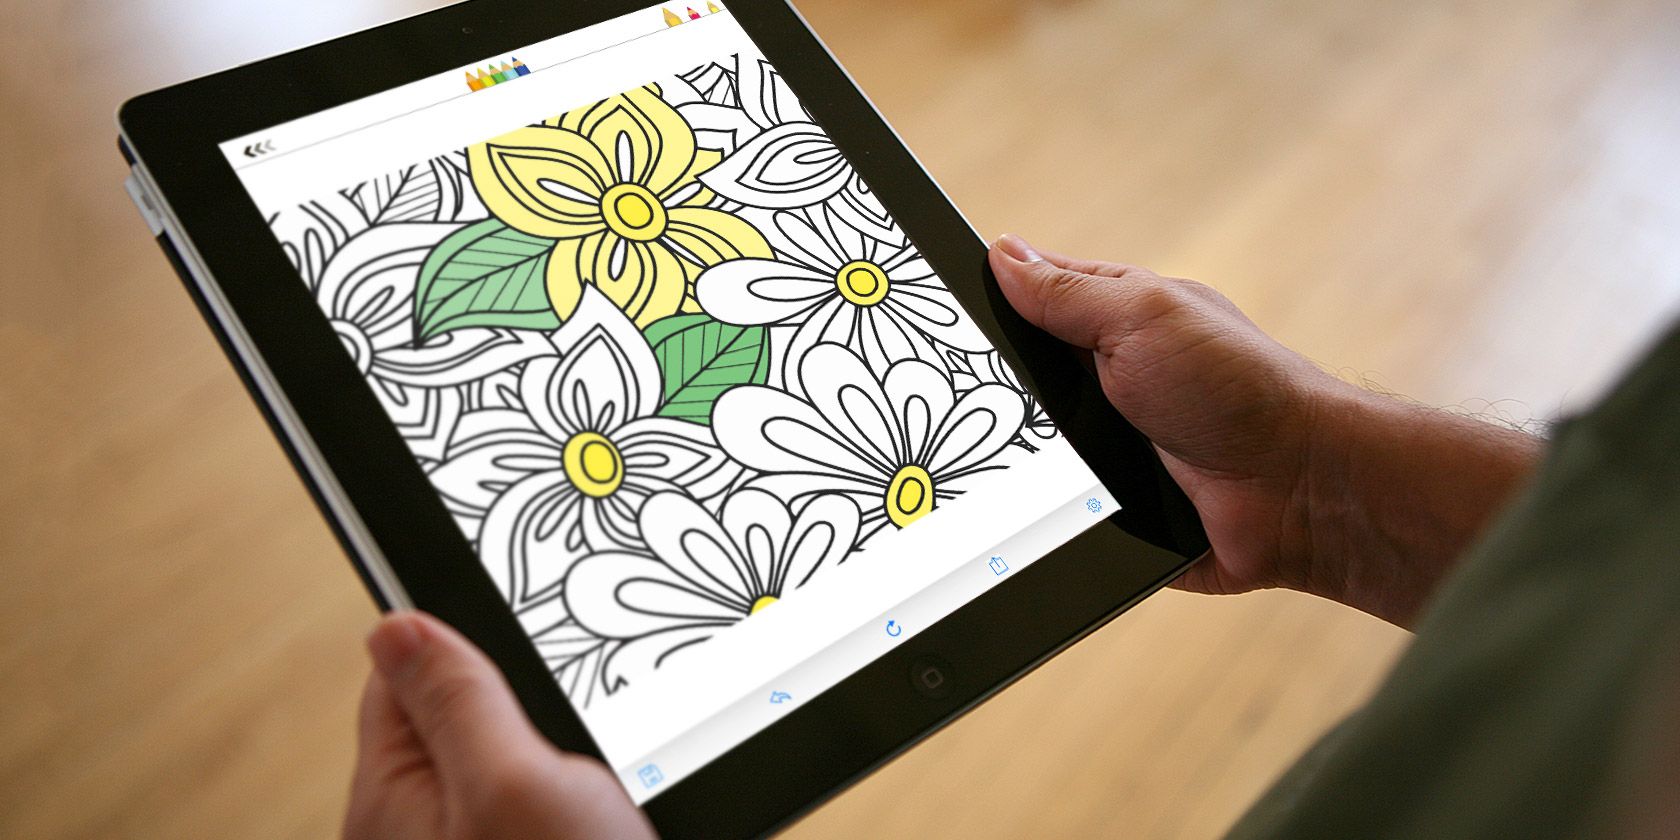 42-best-coloring-apps-for-adults-ipad-amazon-colorfy-coloring